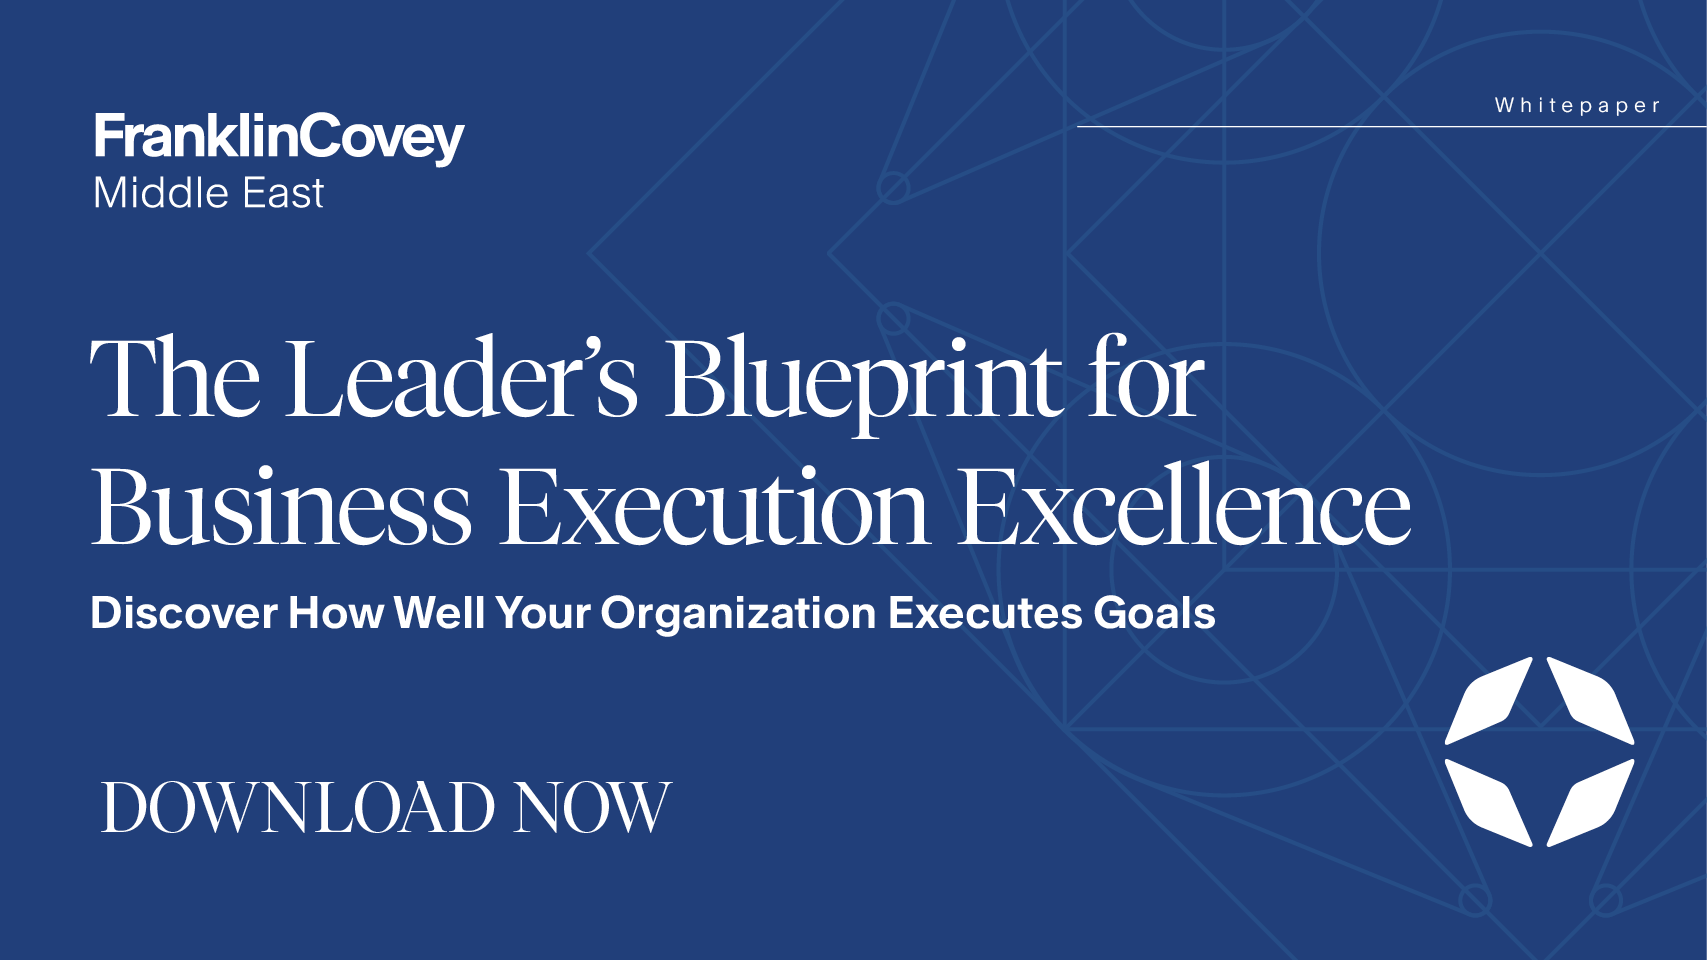 Whitepaper: The Leader's Blueprint for Business Execution Excellence